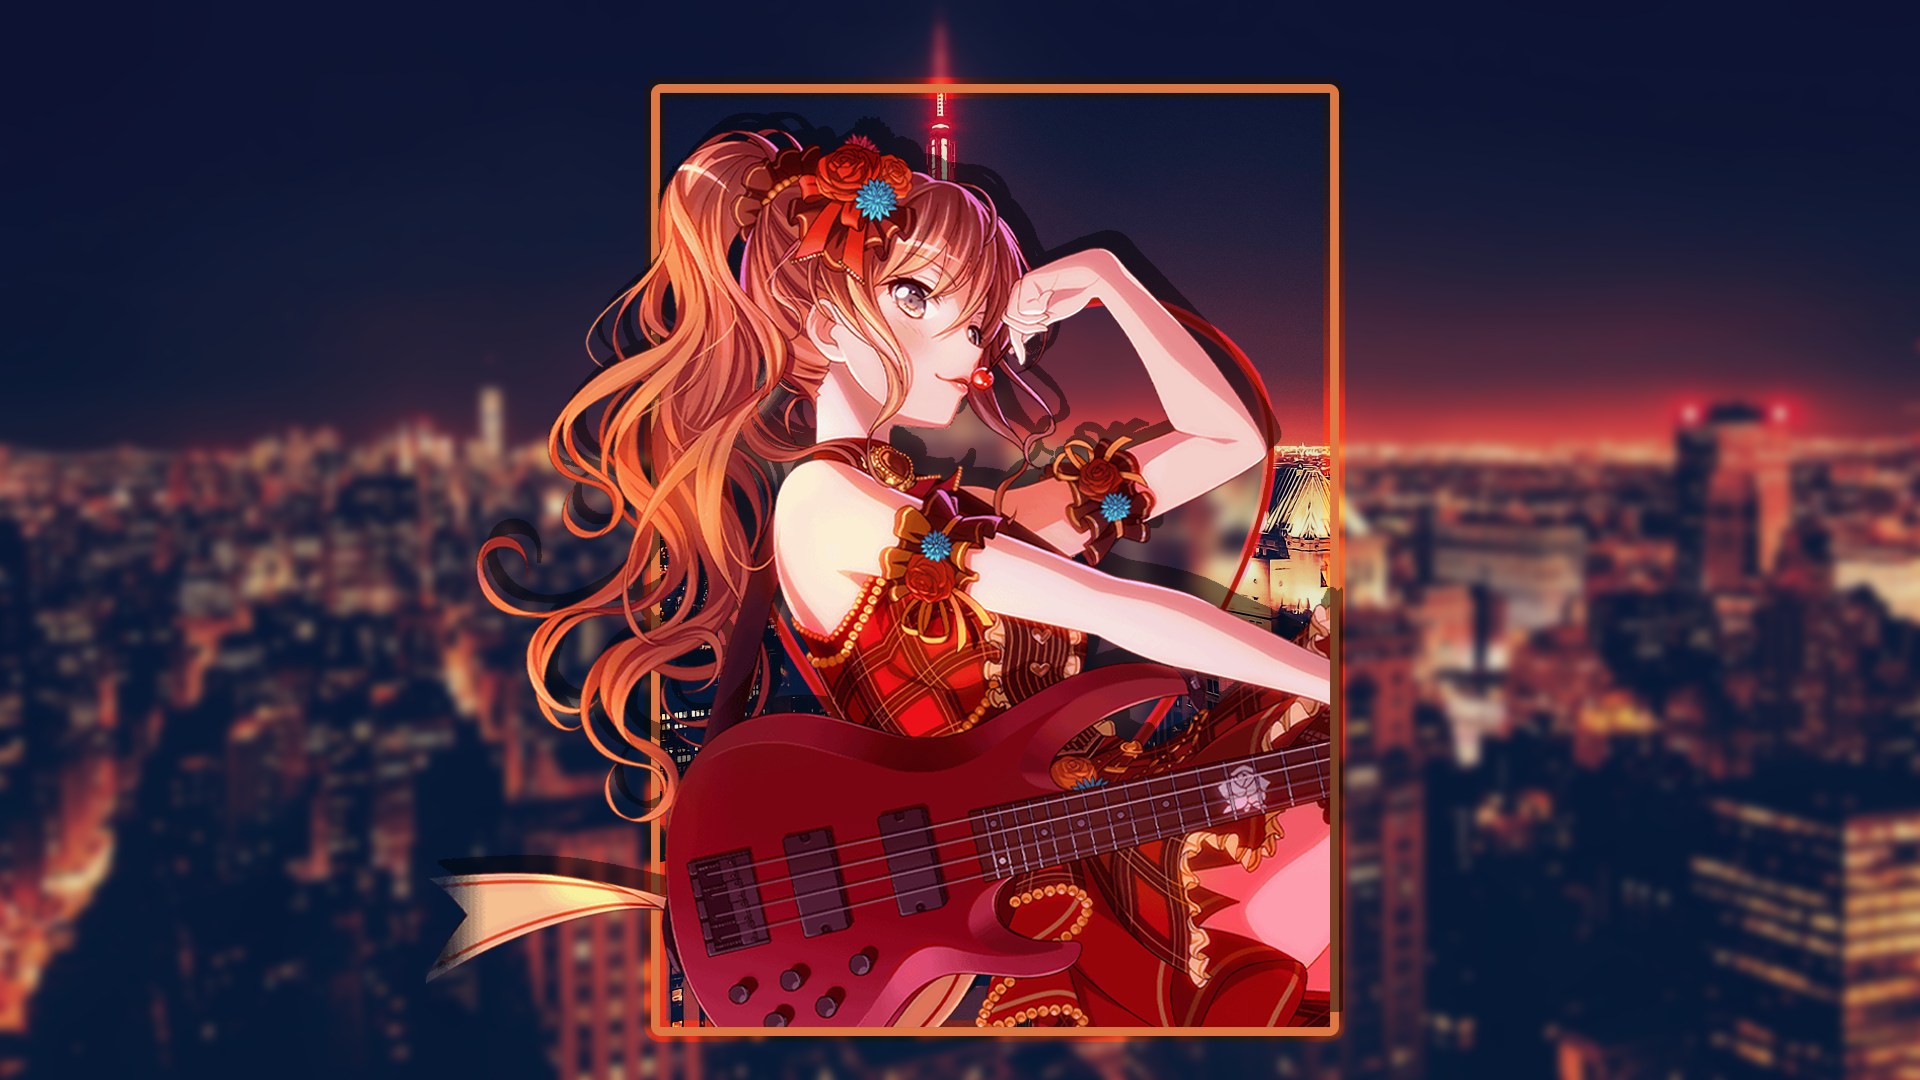 Anime 1920x1080 BanG Dream! Imai Lisa city guitar picture-in-picture